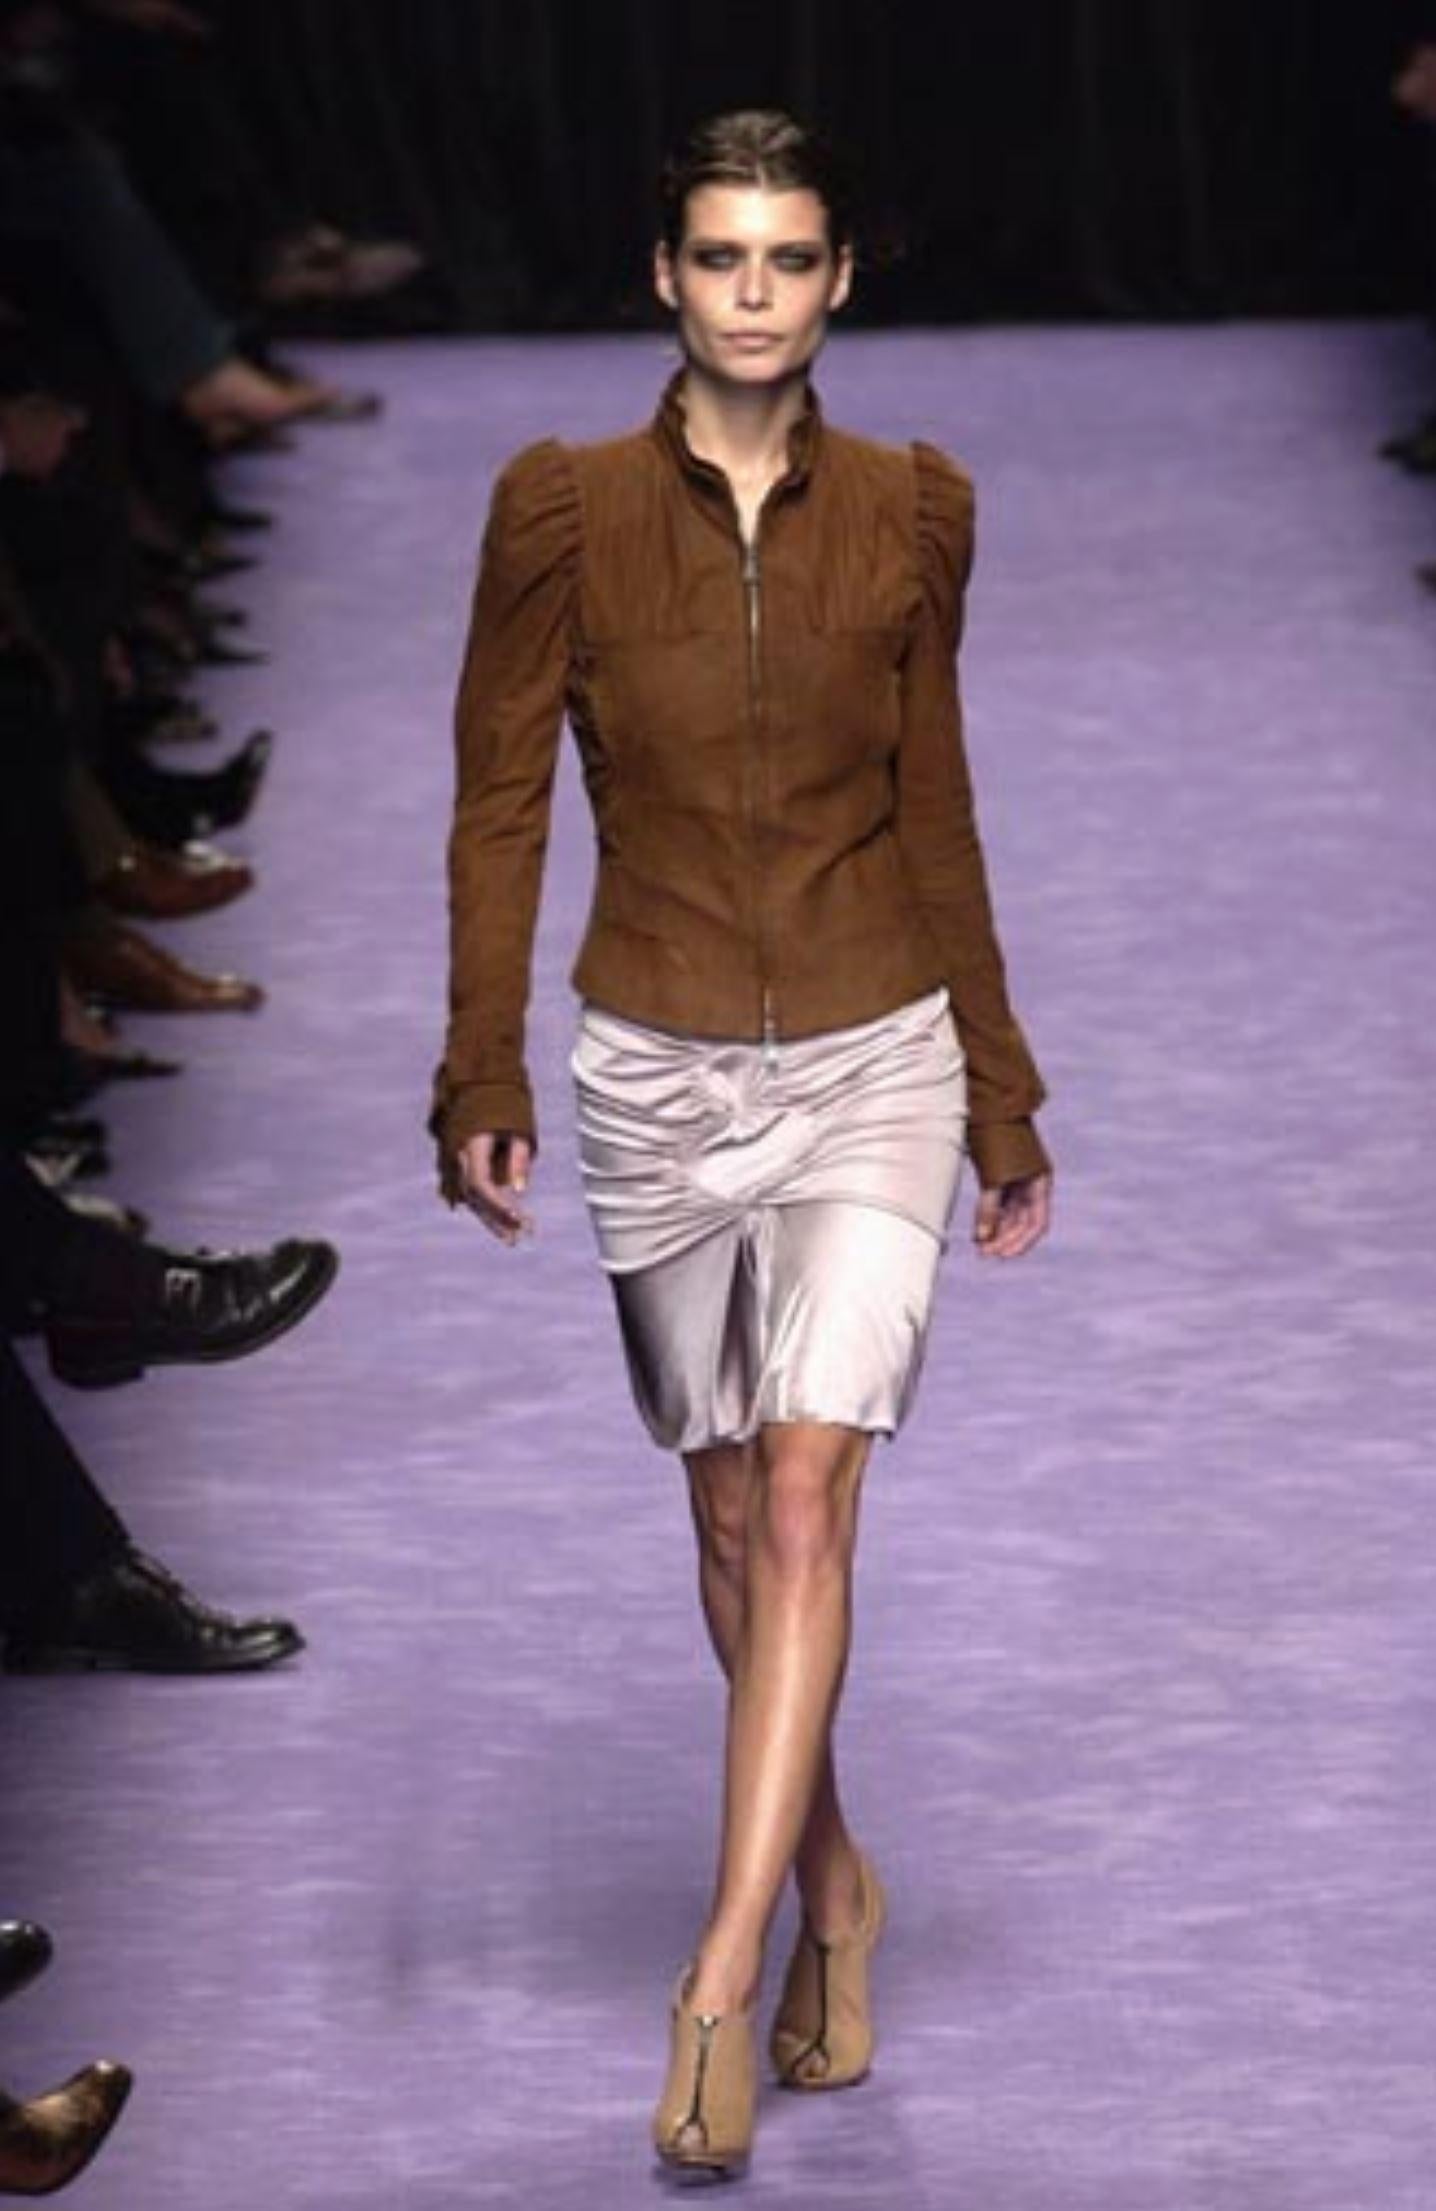 Tom Ford For Yves Saint Laurent
Size: S/M  US4, FR38

Chocolate Brown Suede Jacket
Spring/Summer 2003 Runway Collection
Amazing attention to detail
Ruffled Shoulders 
Stand Up Collar 
Silk Lined
Zips up the Front
Hidden Button and Exposed Silk at